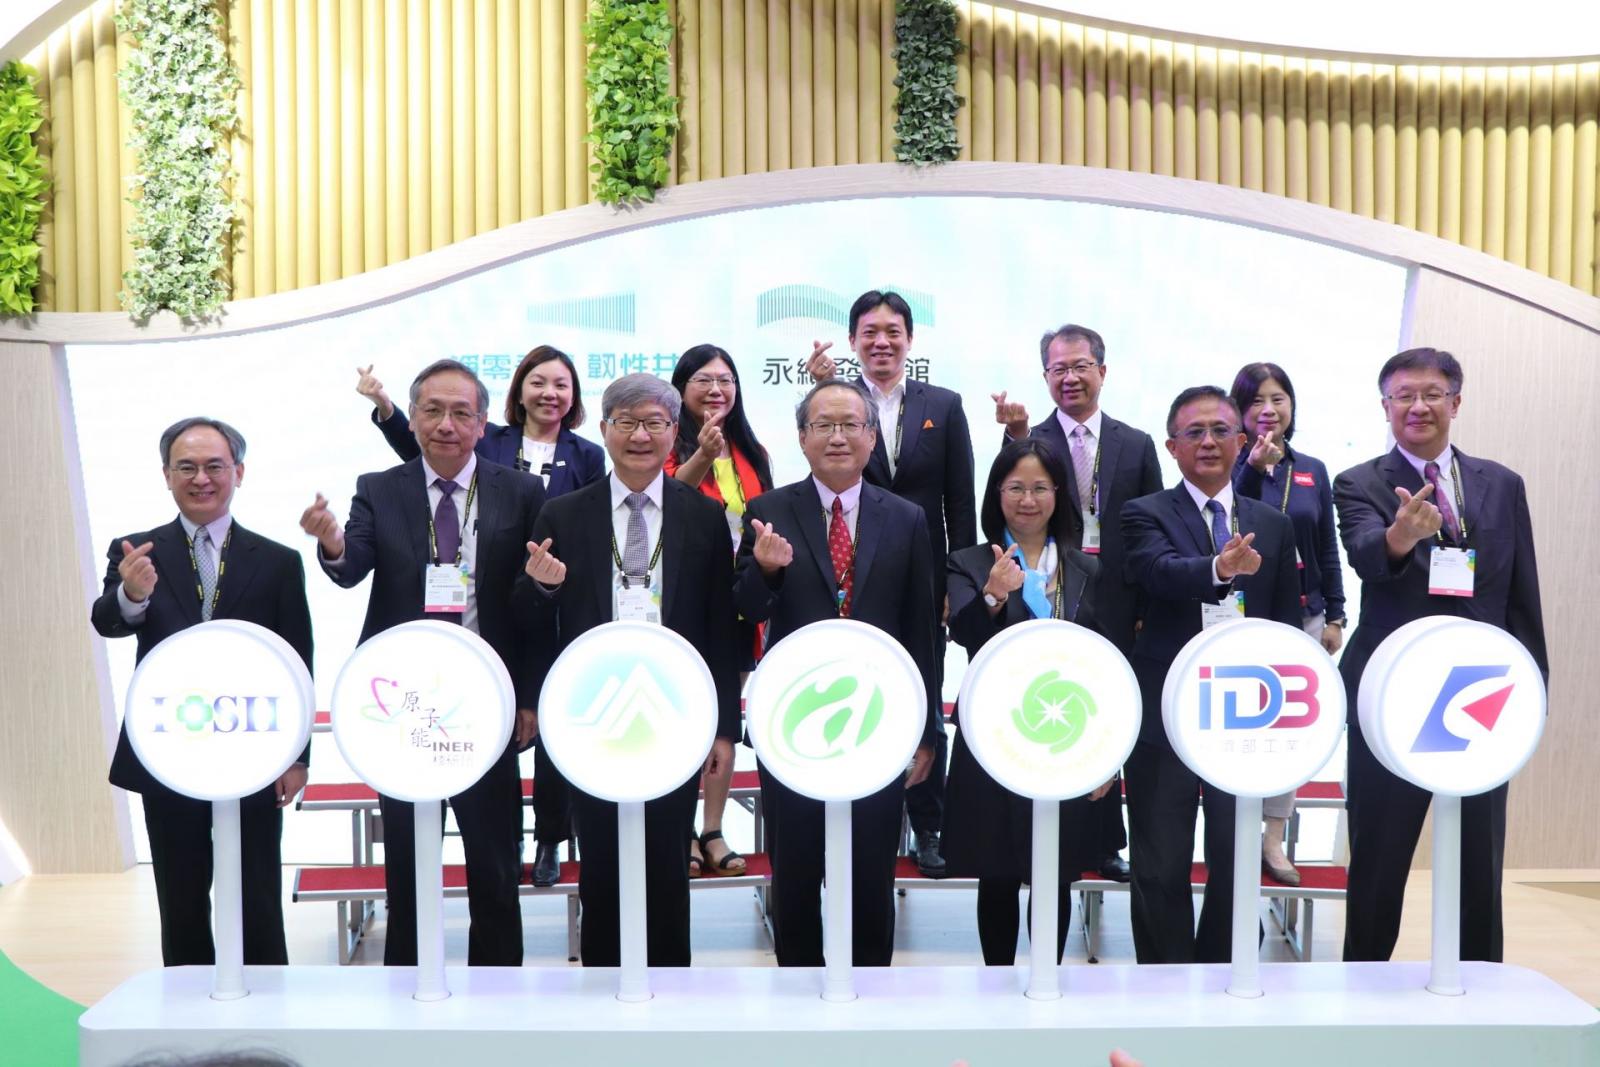 This photo was taken at the opening ceremony of the “Sustainability Pavilion” at the “2022 Taiwan Innotech Expo,” where five ministries, seven agencies, and 10 international corporations had technologies on display.